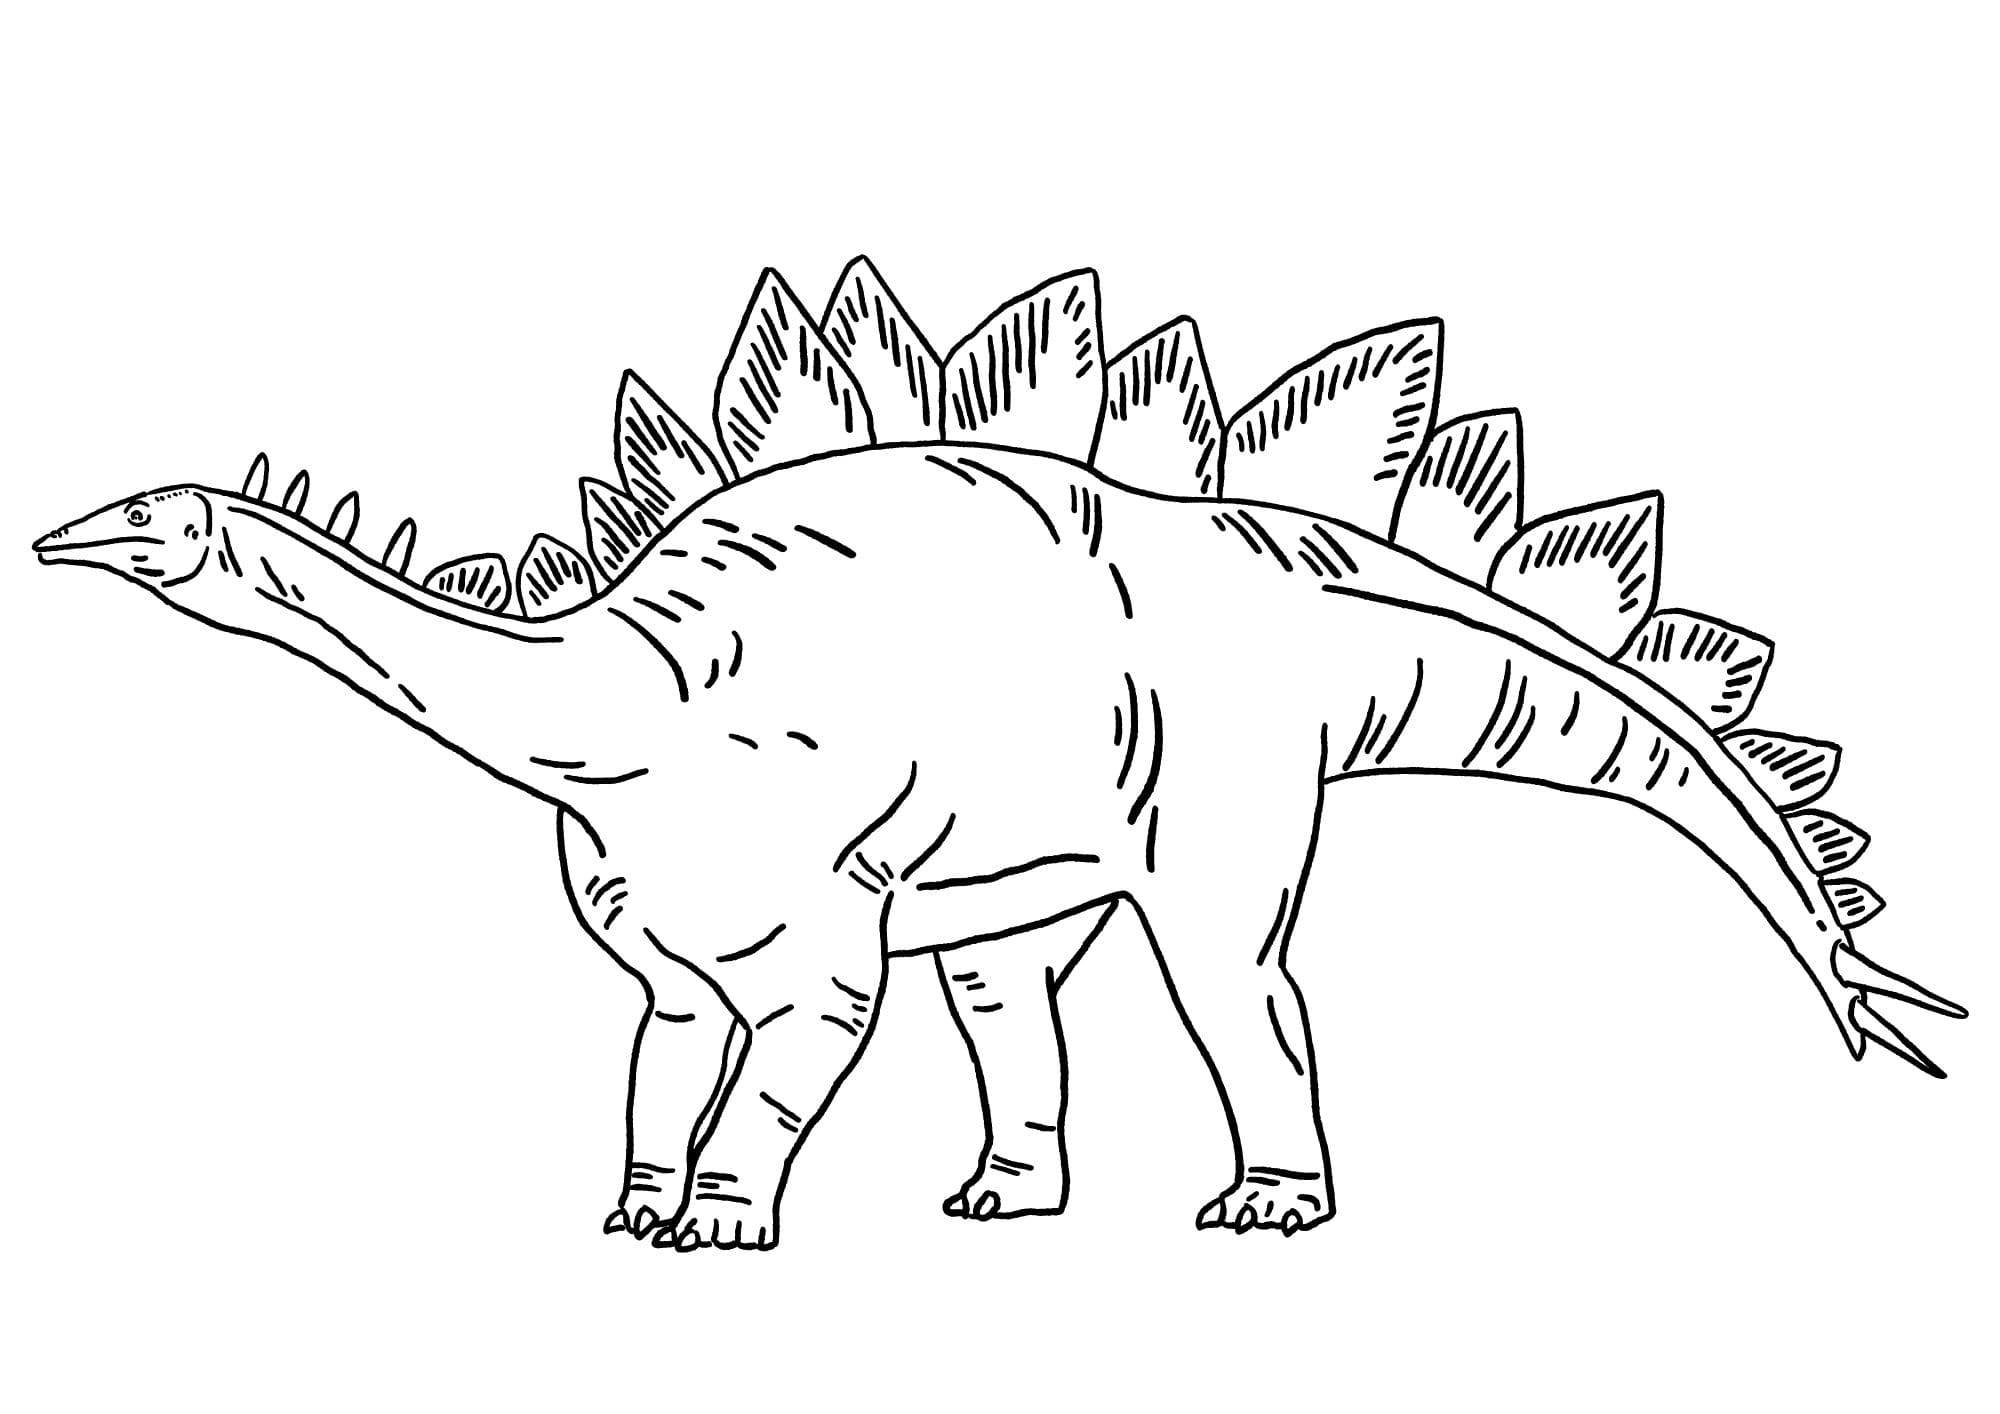 Stegosaurus pictures to color (Free + Printable)